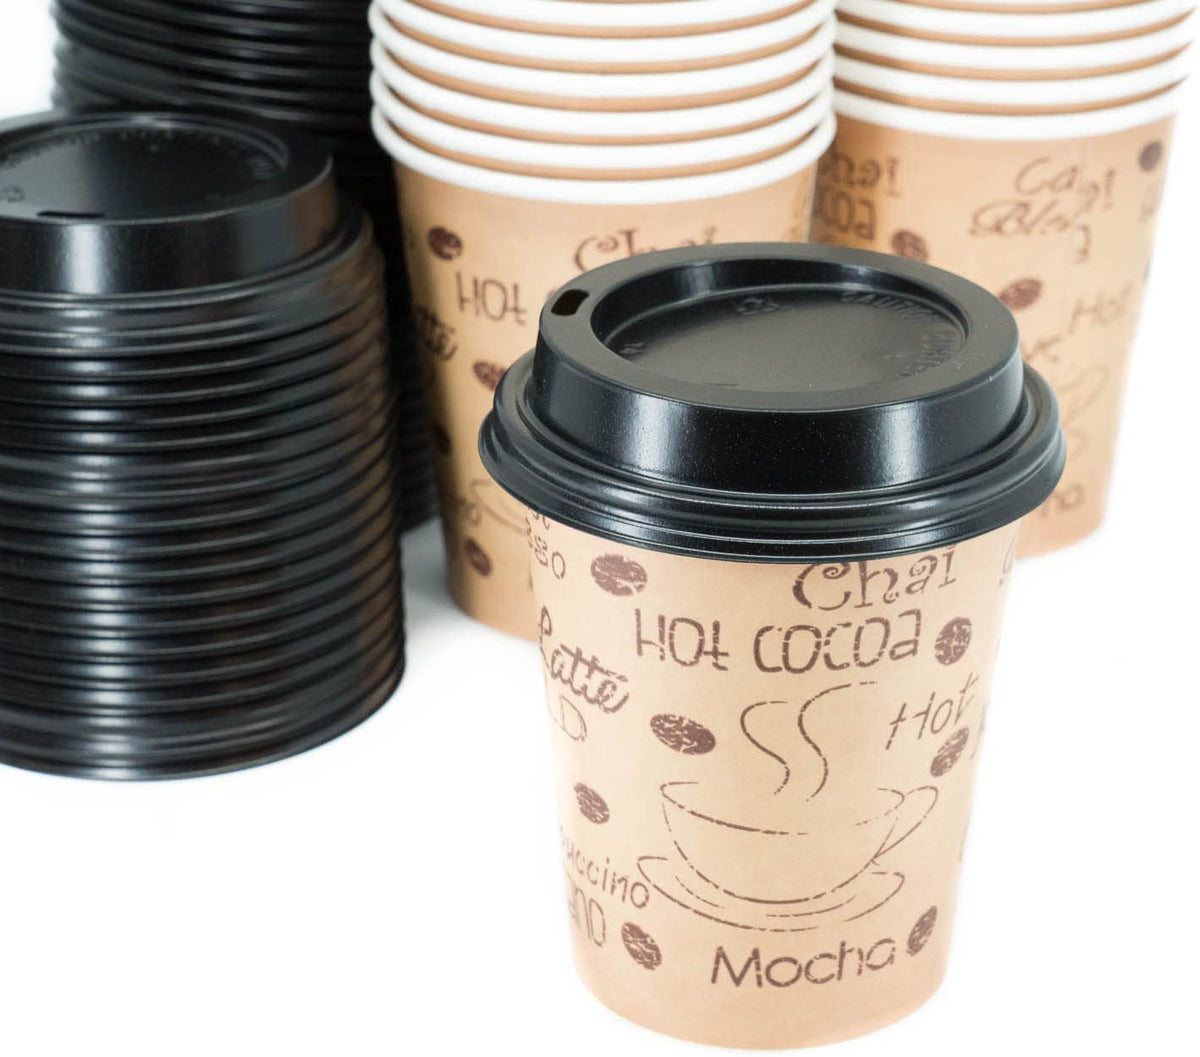 Disposable Cups for Hot Drinks, Disposable Coffee Cups